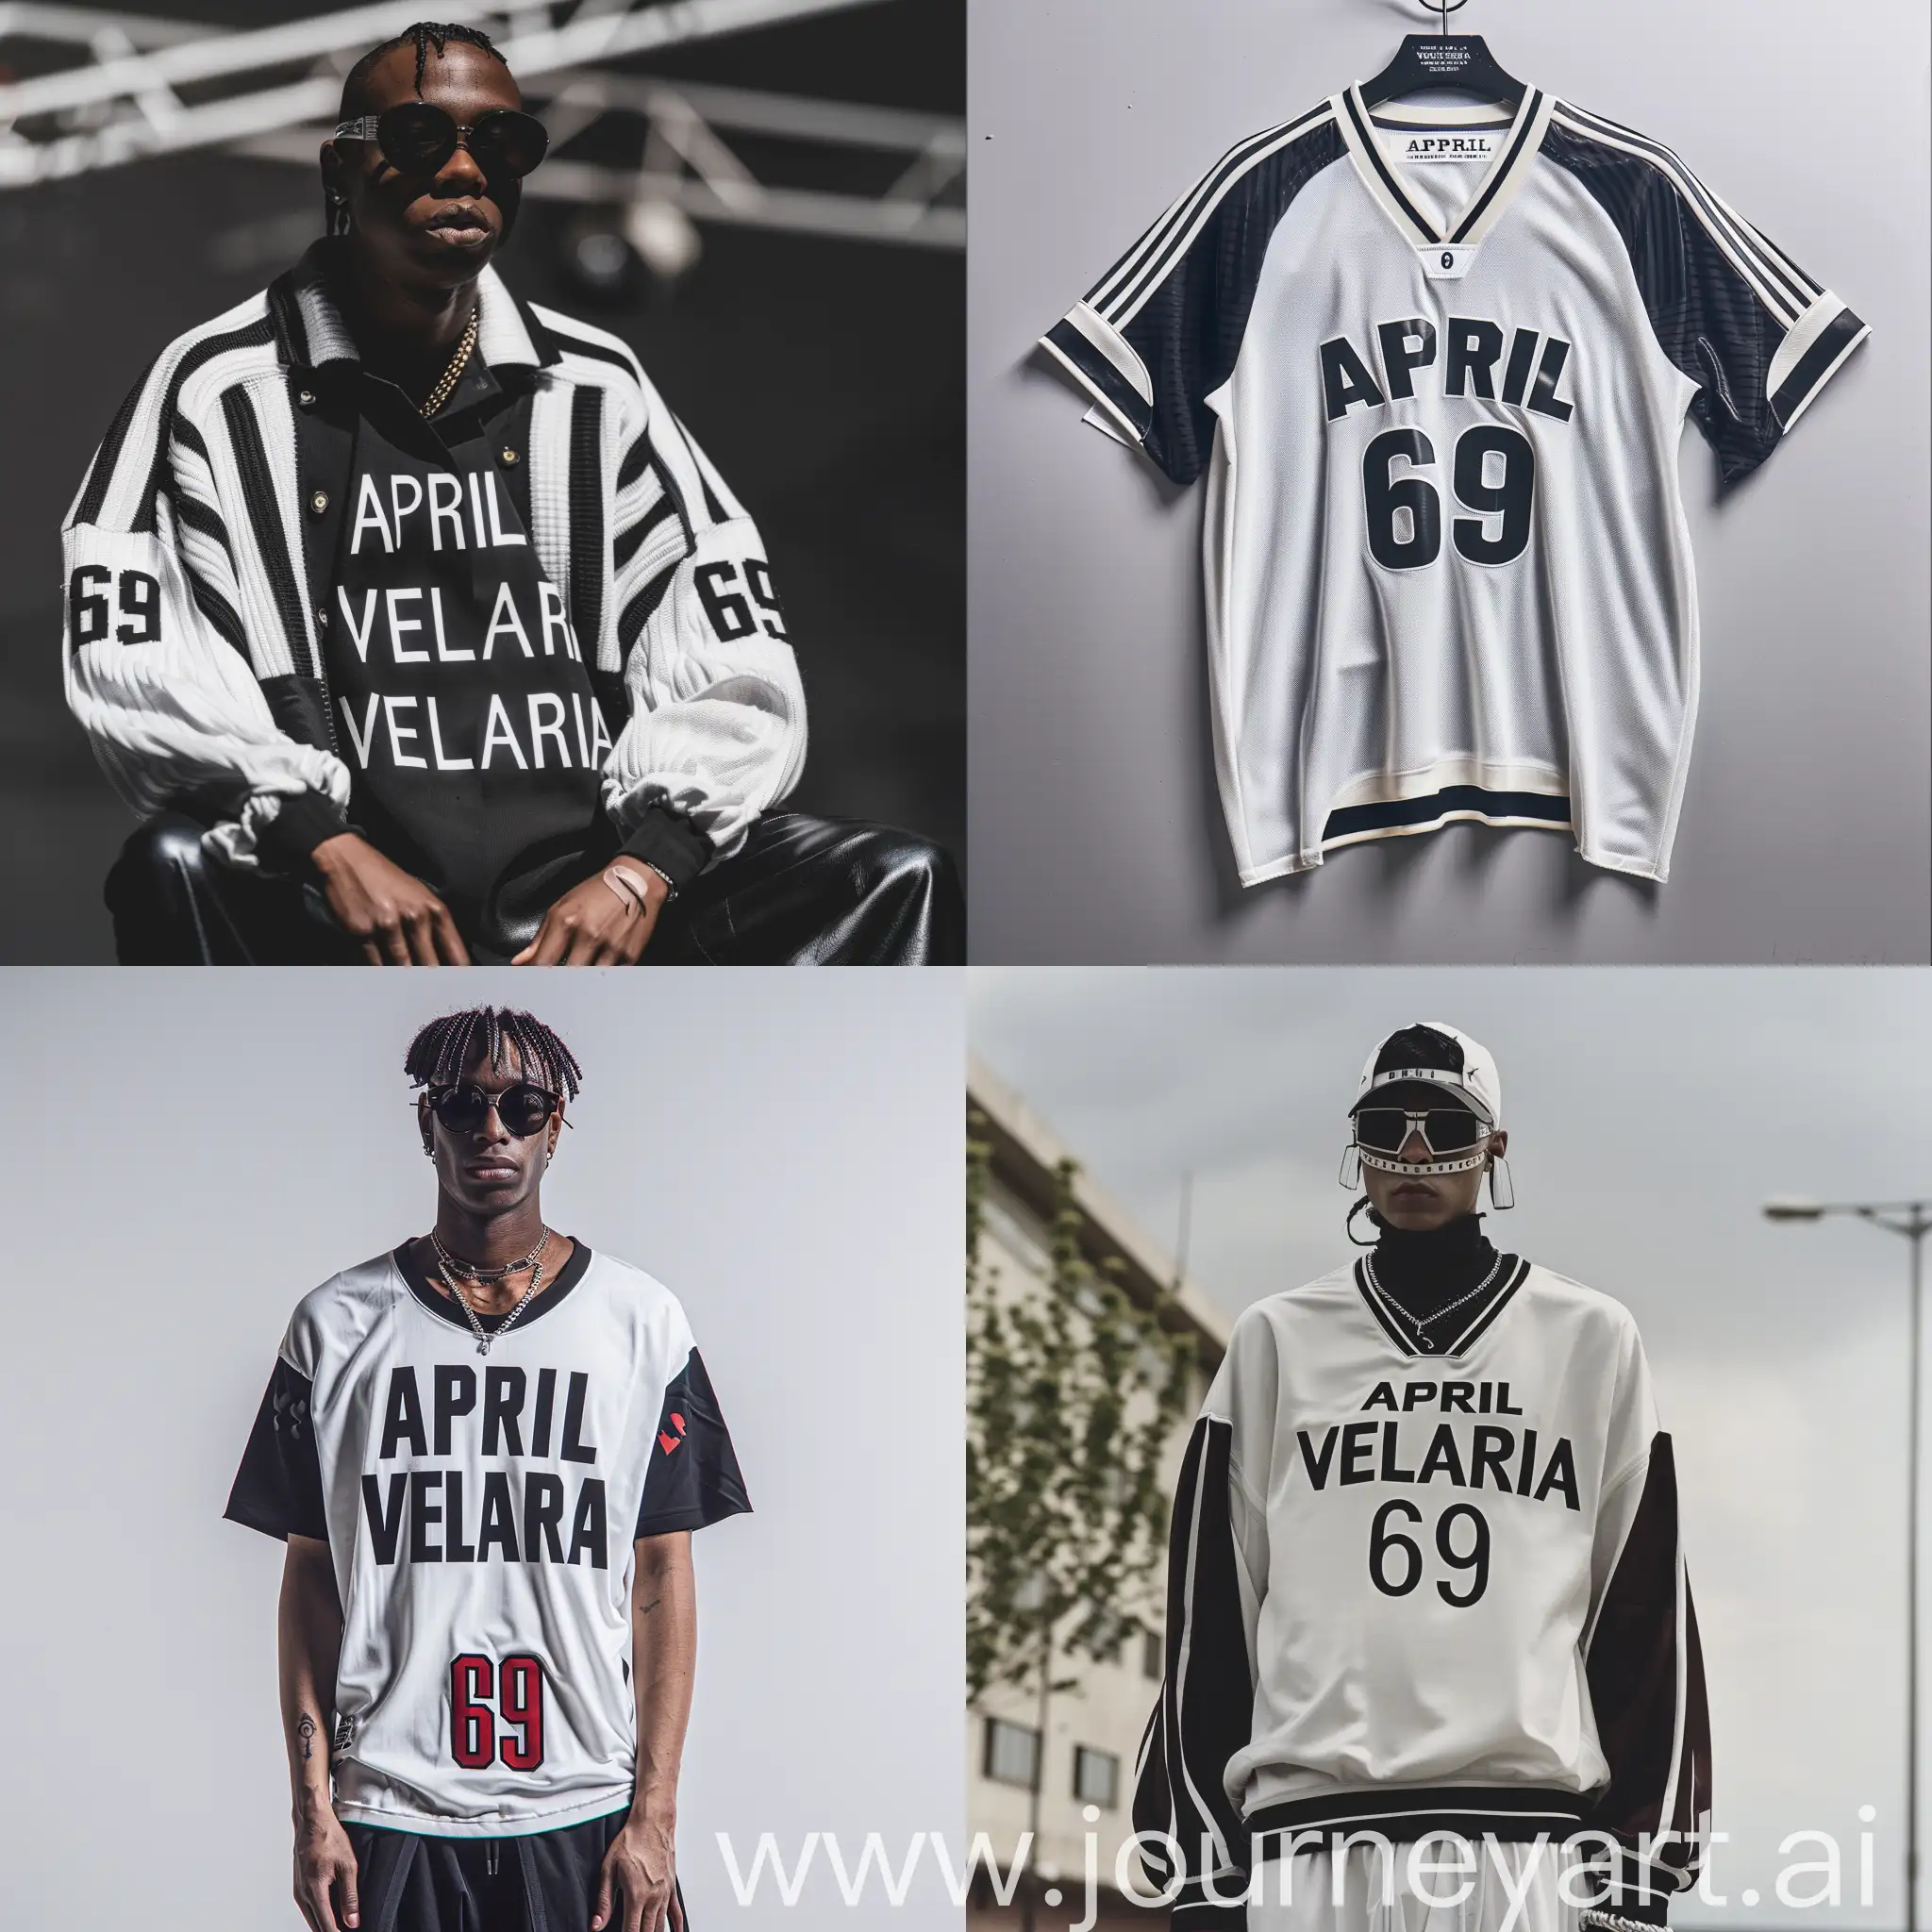 high fashion unique white-black jersey of a team with unusual pieces inspired by Maison Margiela with an “APRIL VELARIA” words in it and number 69 as a player team number 